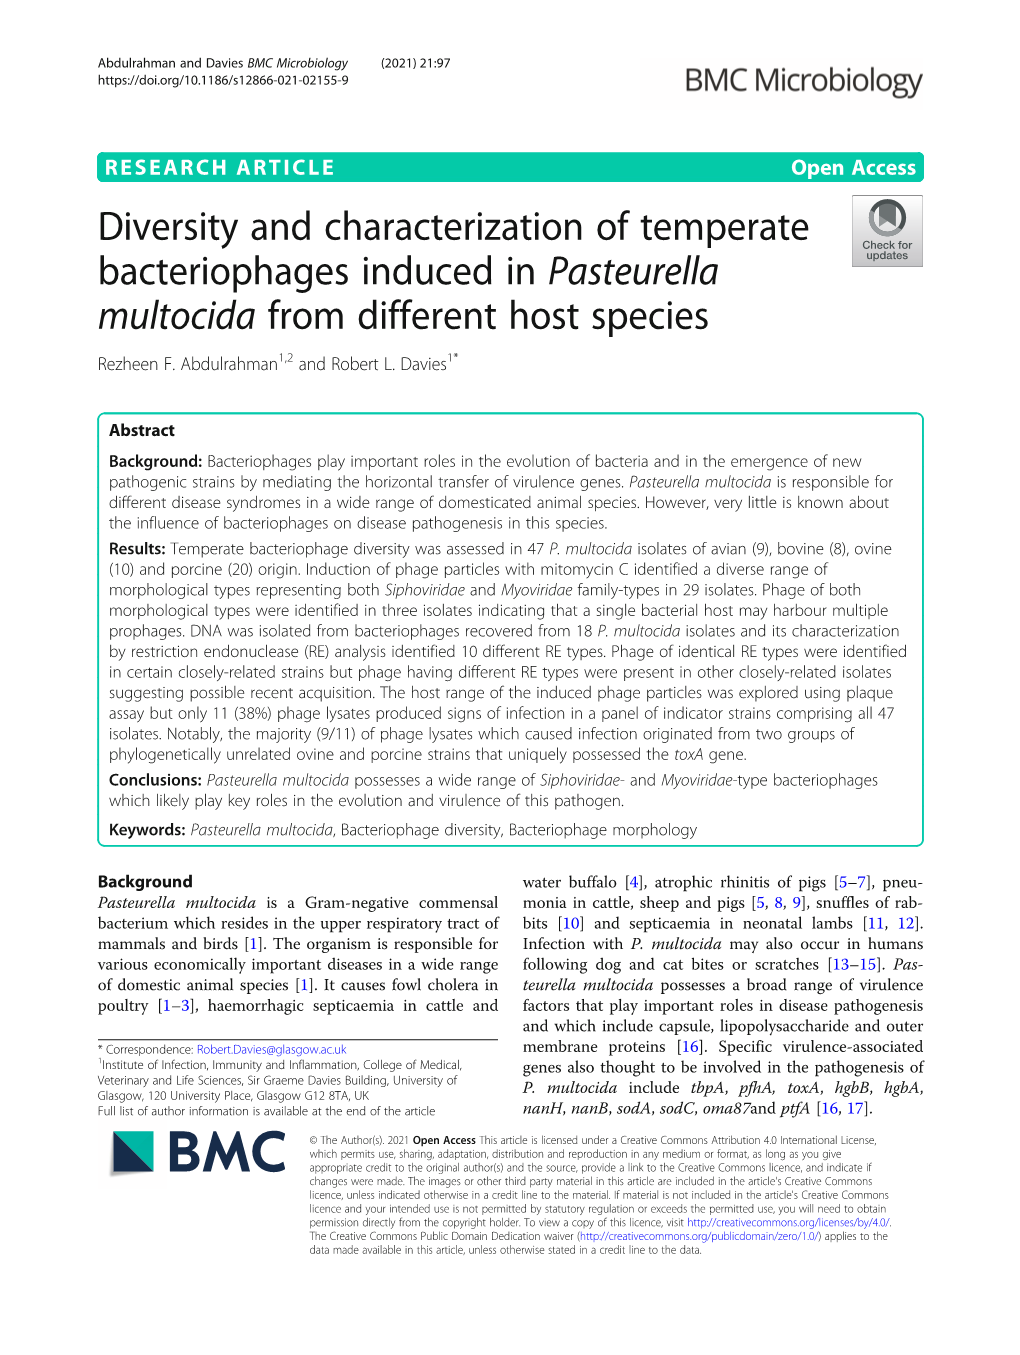 Diversity and Characterization of Temperate Bacteriophages Induced in Pasteurella Multocida from Different Host Species Rezheen F